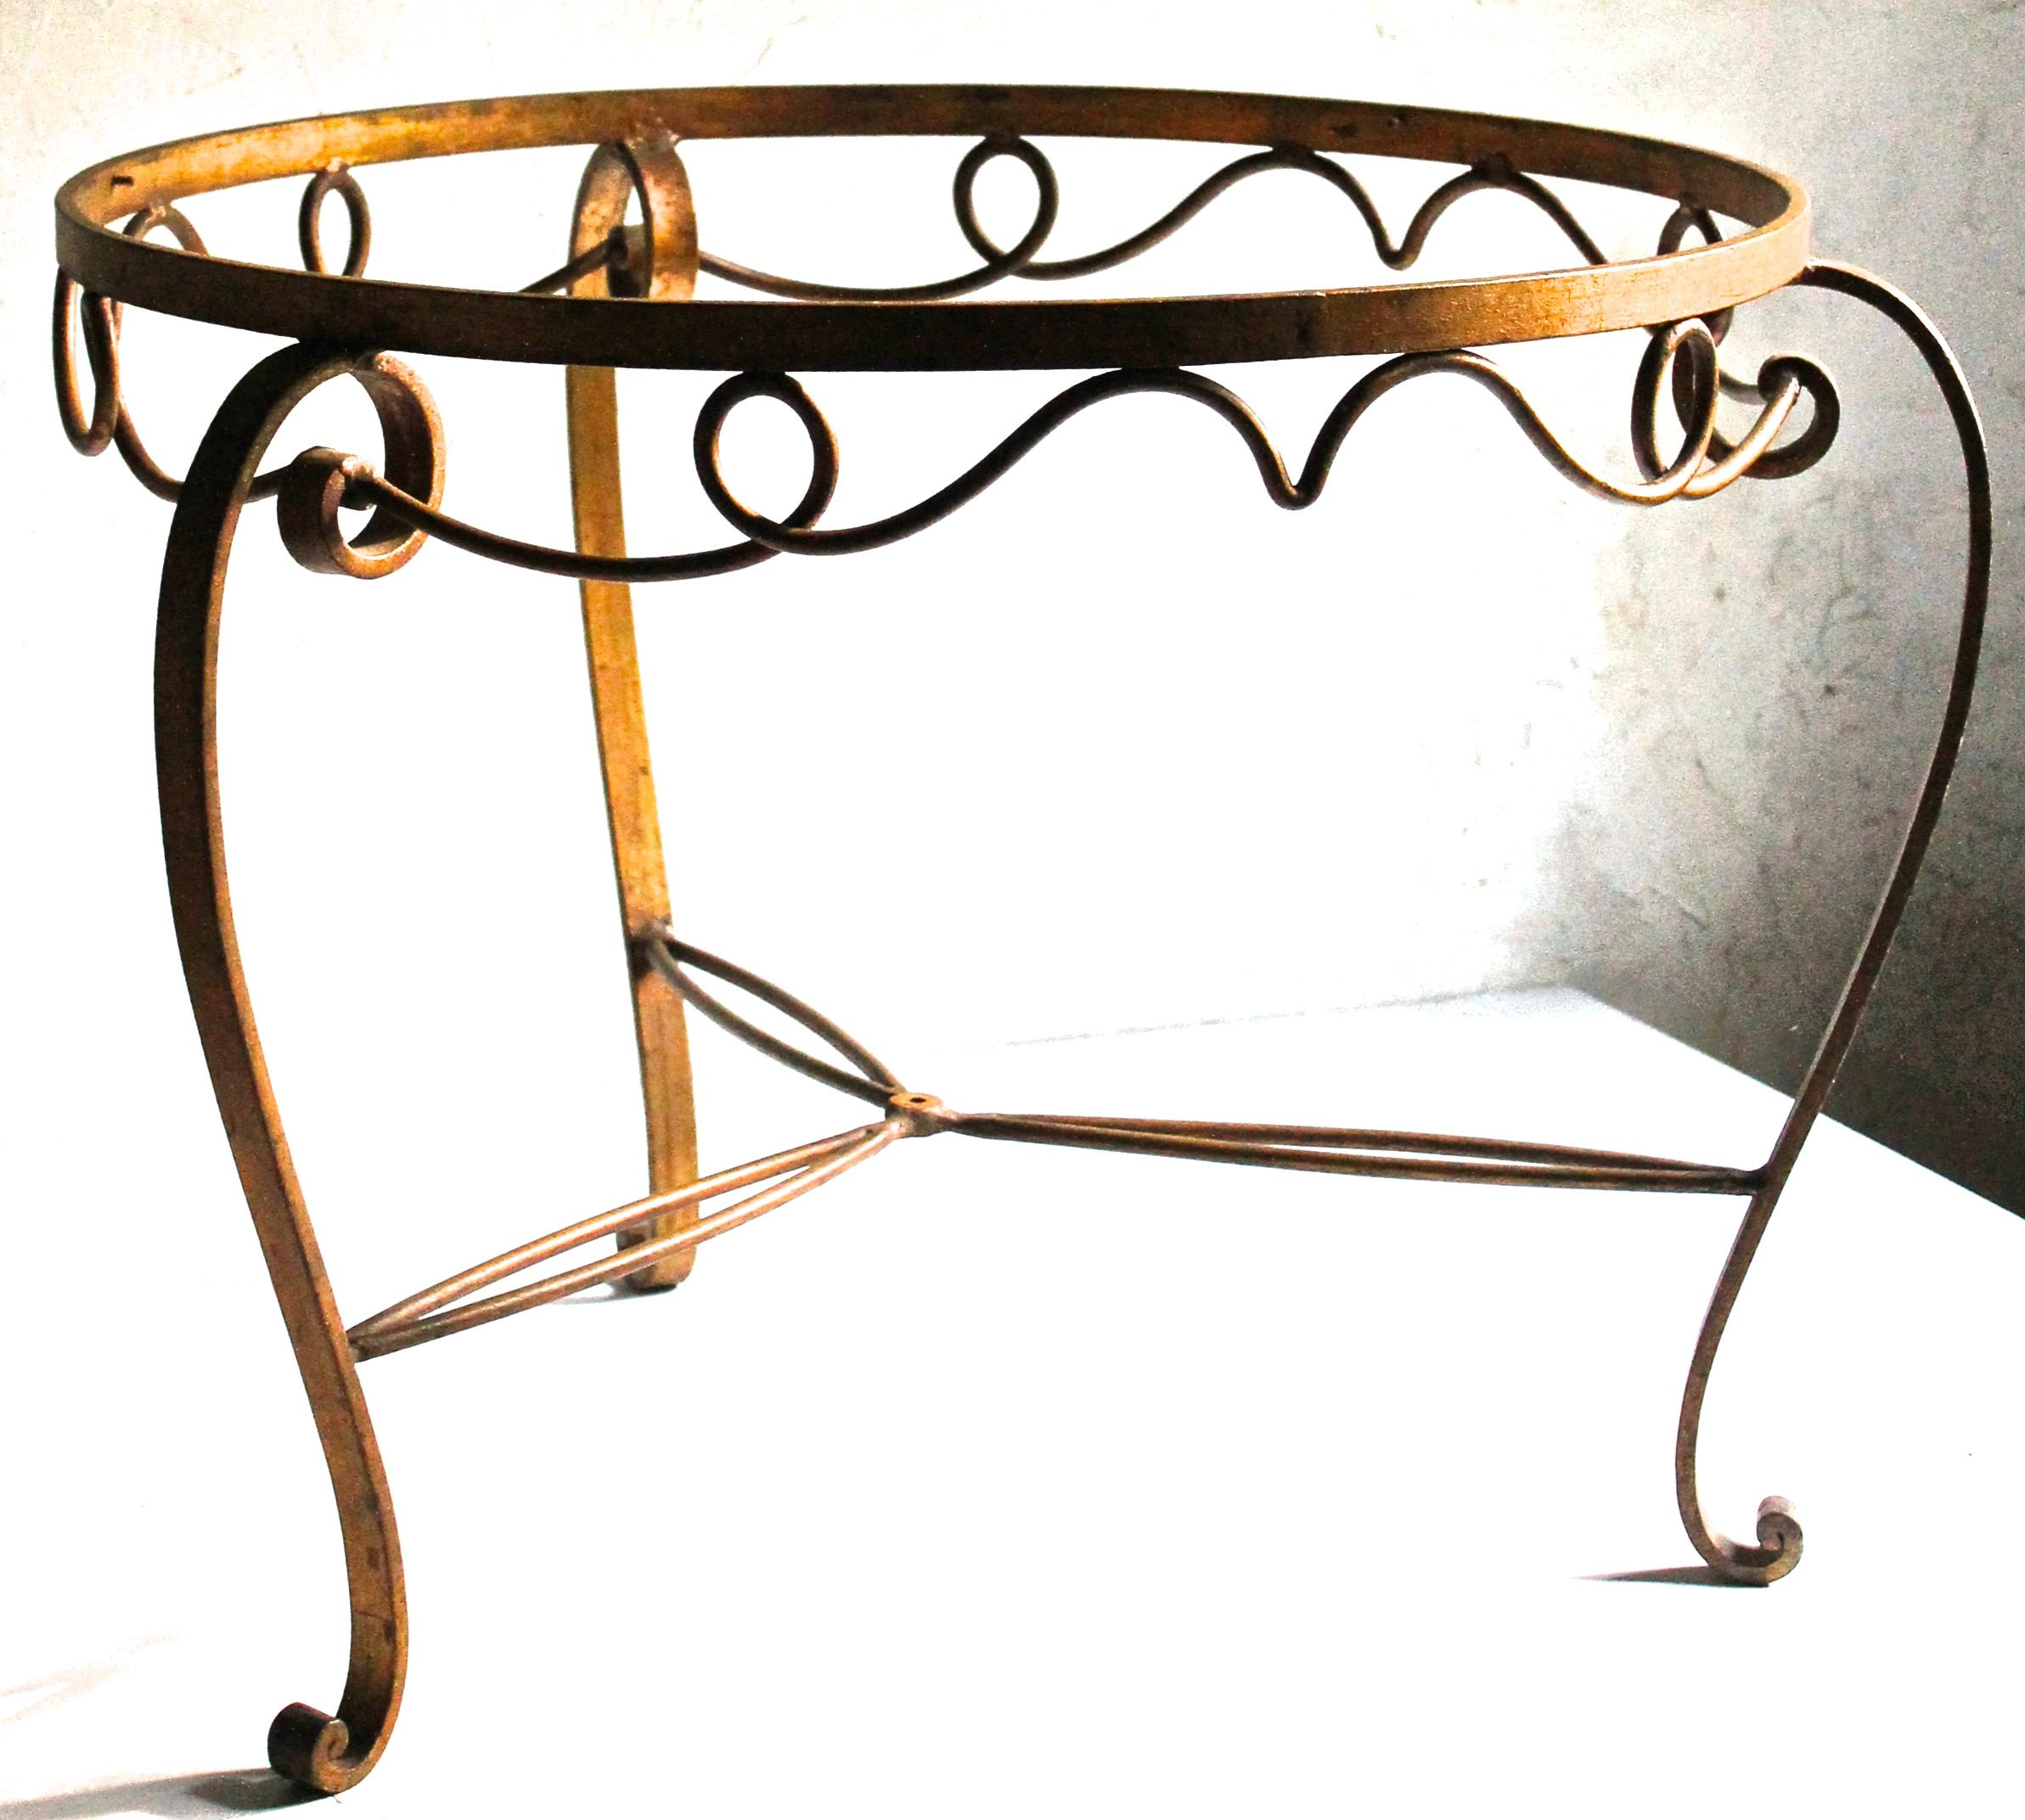 A beautiful and gracefully formed low table in the French 1940s style of Rene Drouet and Rene Prou.